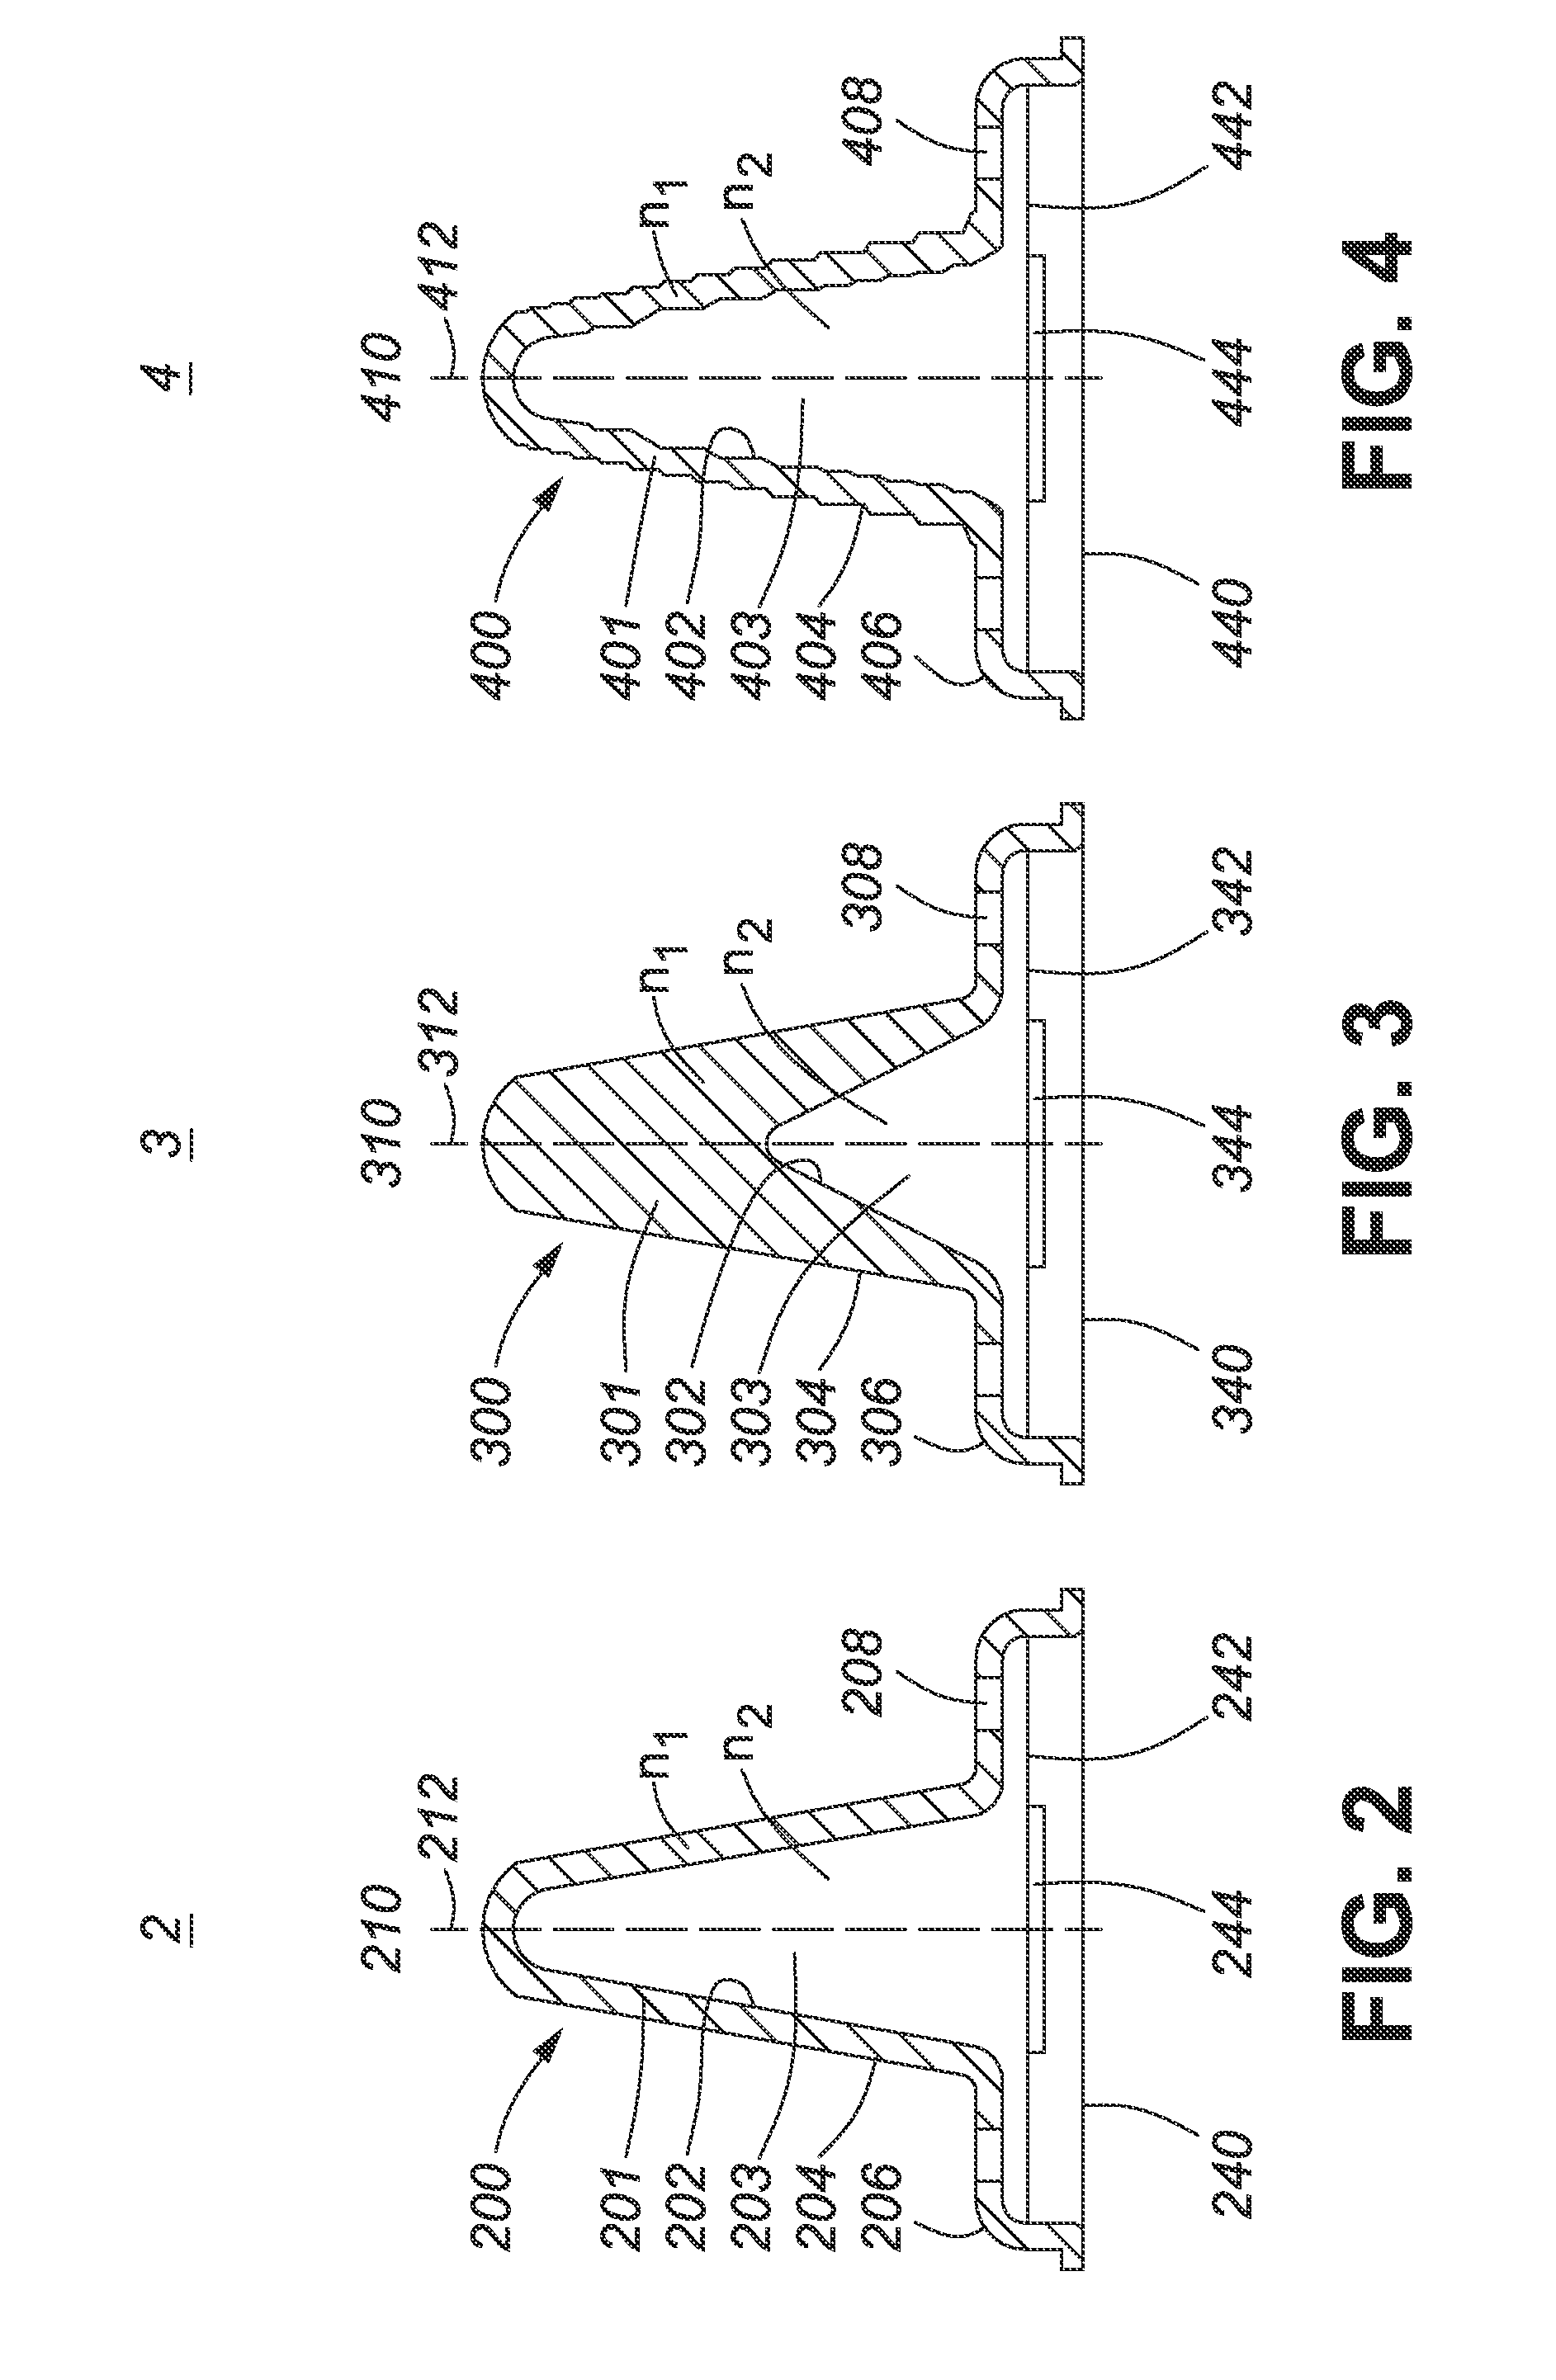 Optical device and system for solid-state lighting